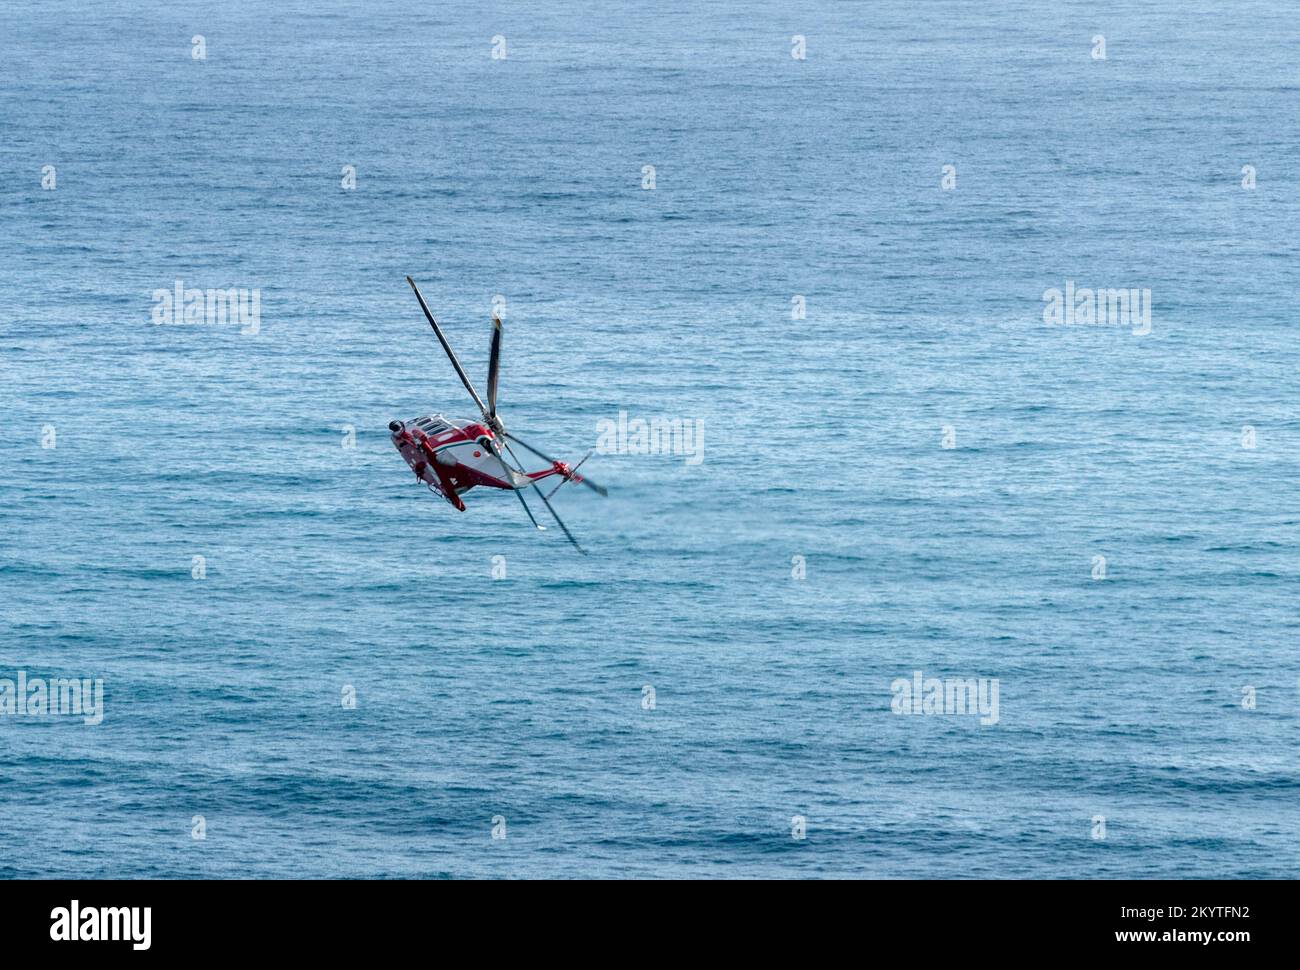 Helicopter flying over open sea seen in Italy Stock Photo